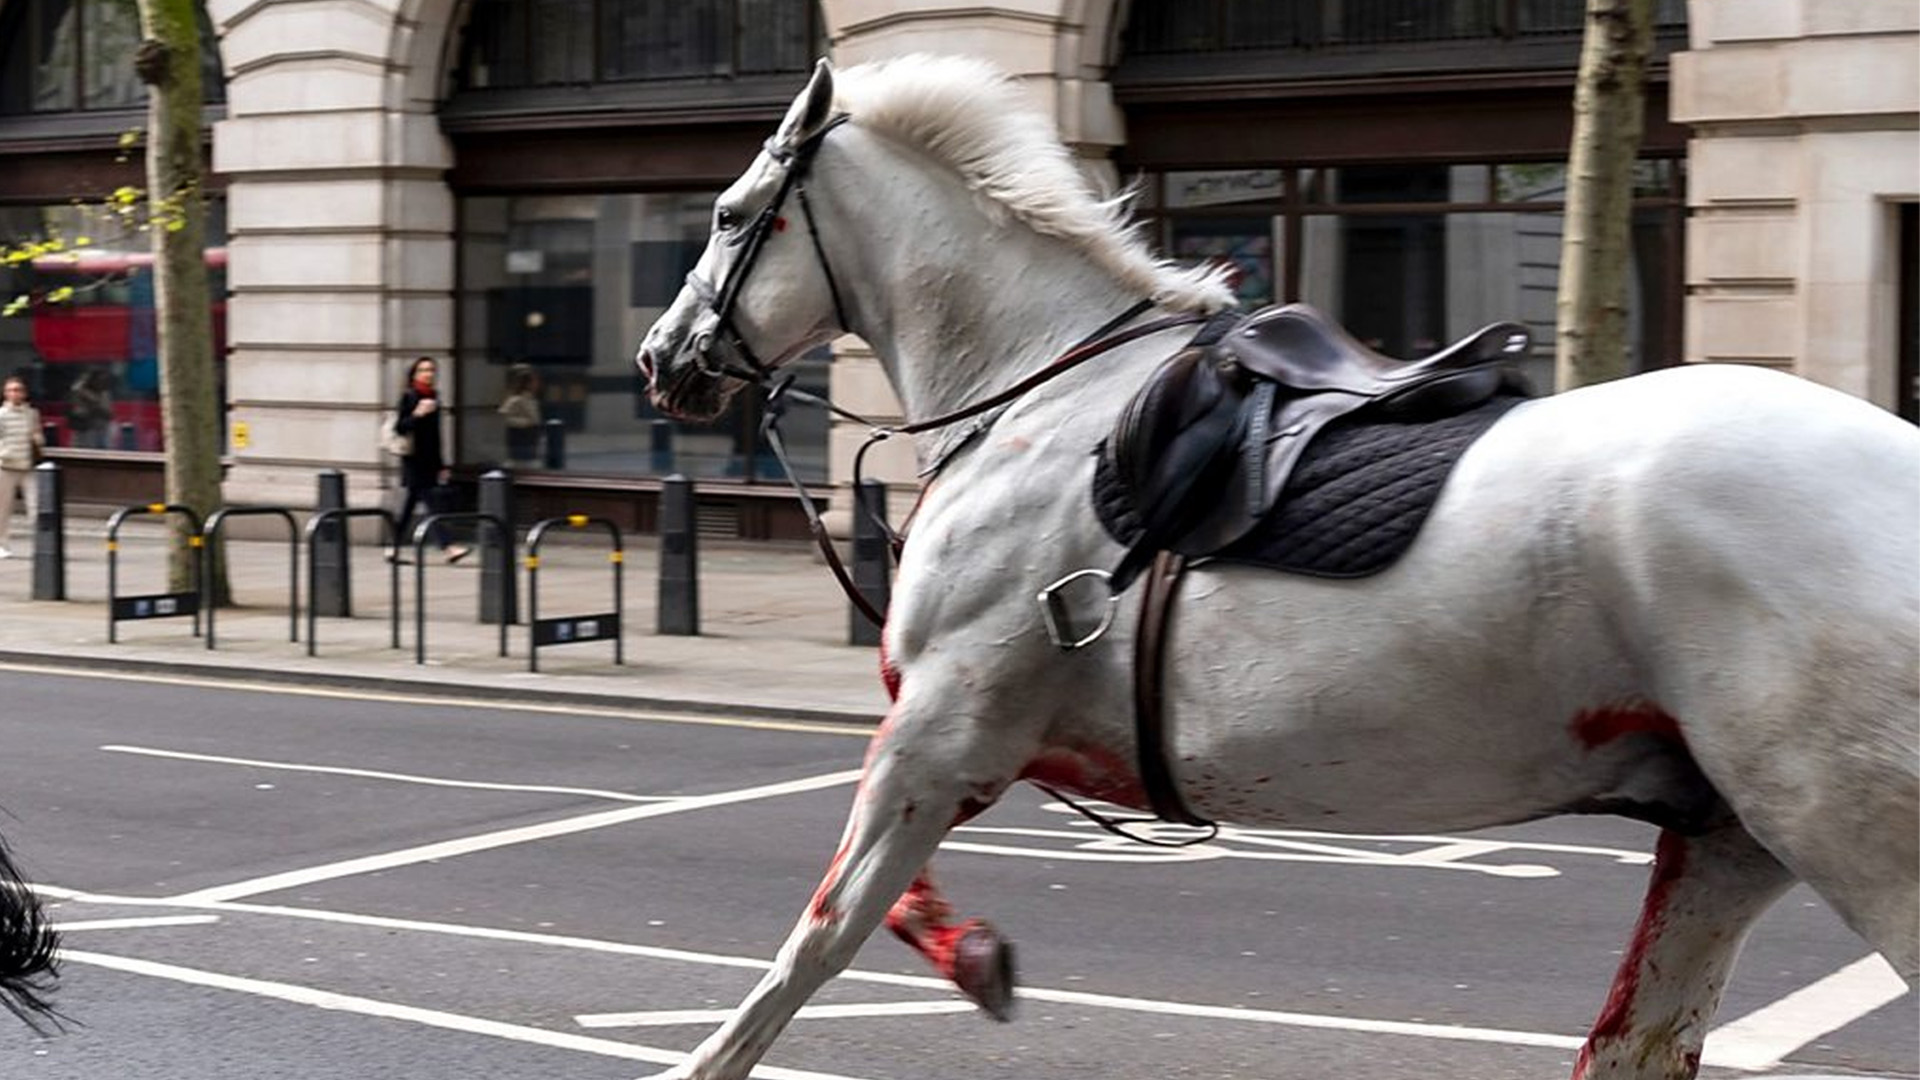 Blood-Covered Horses Charge Through Central London